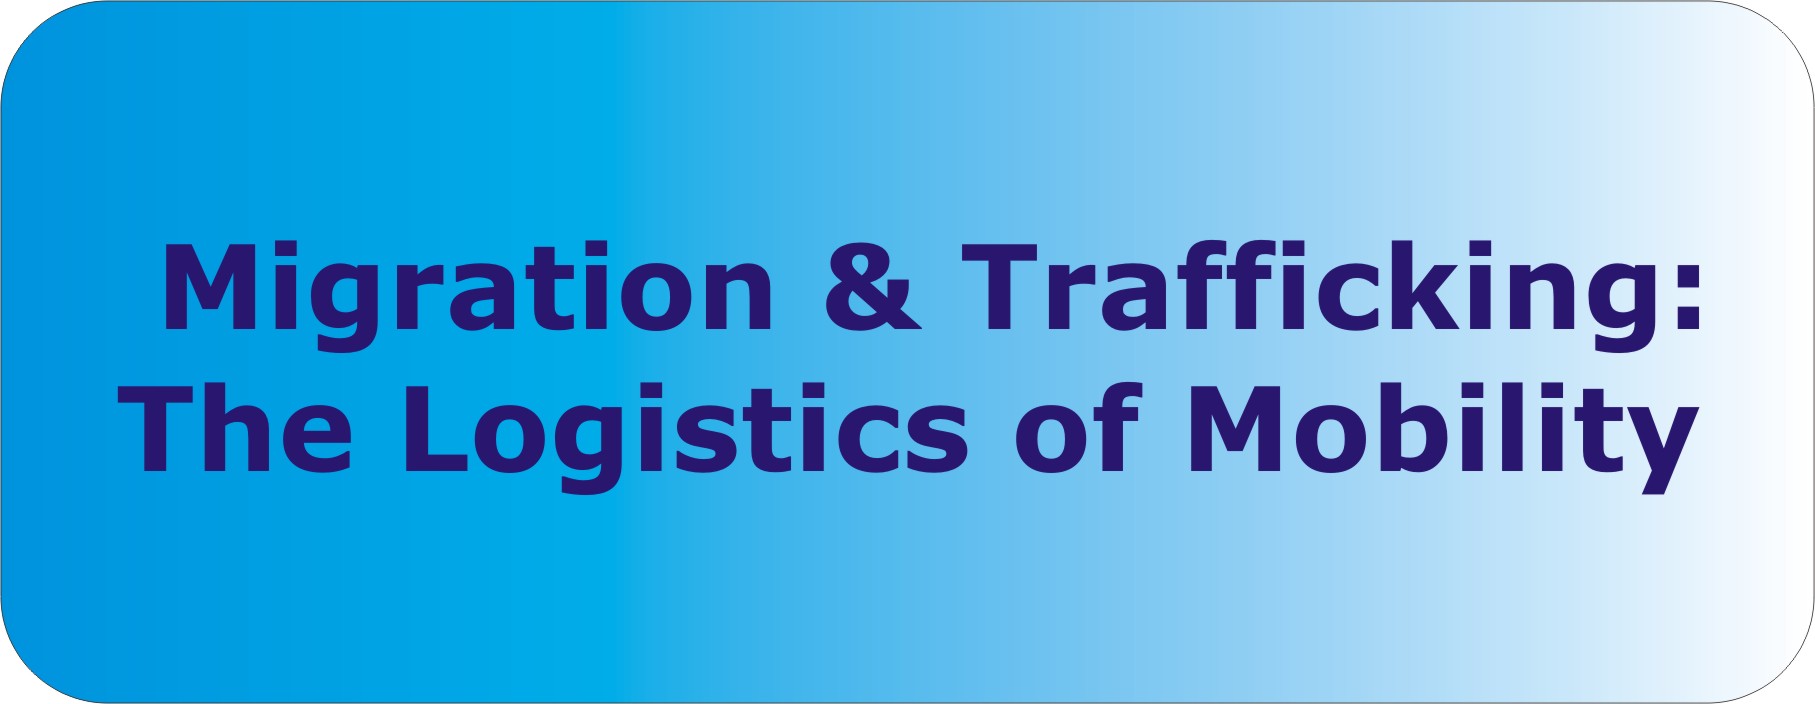 Migration and Trafficking: The Logistics of Mobility